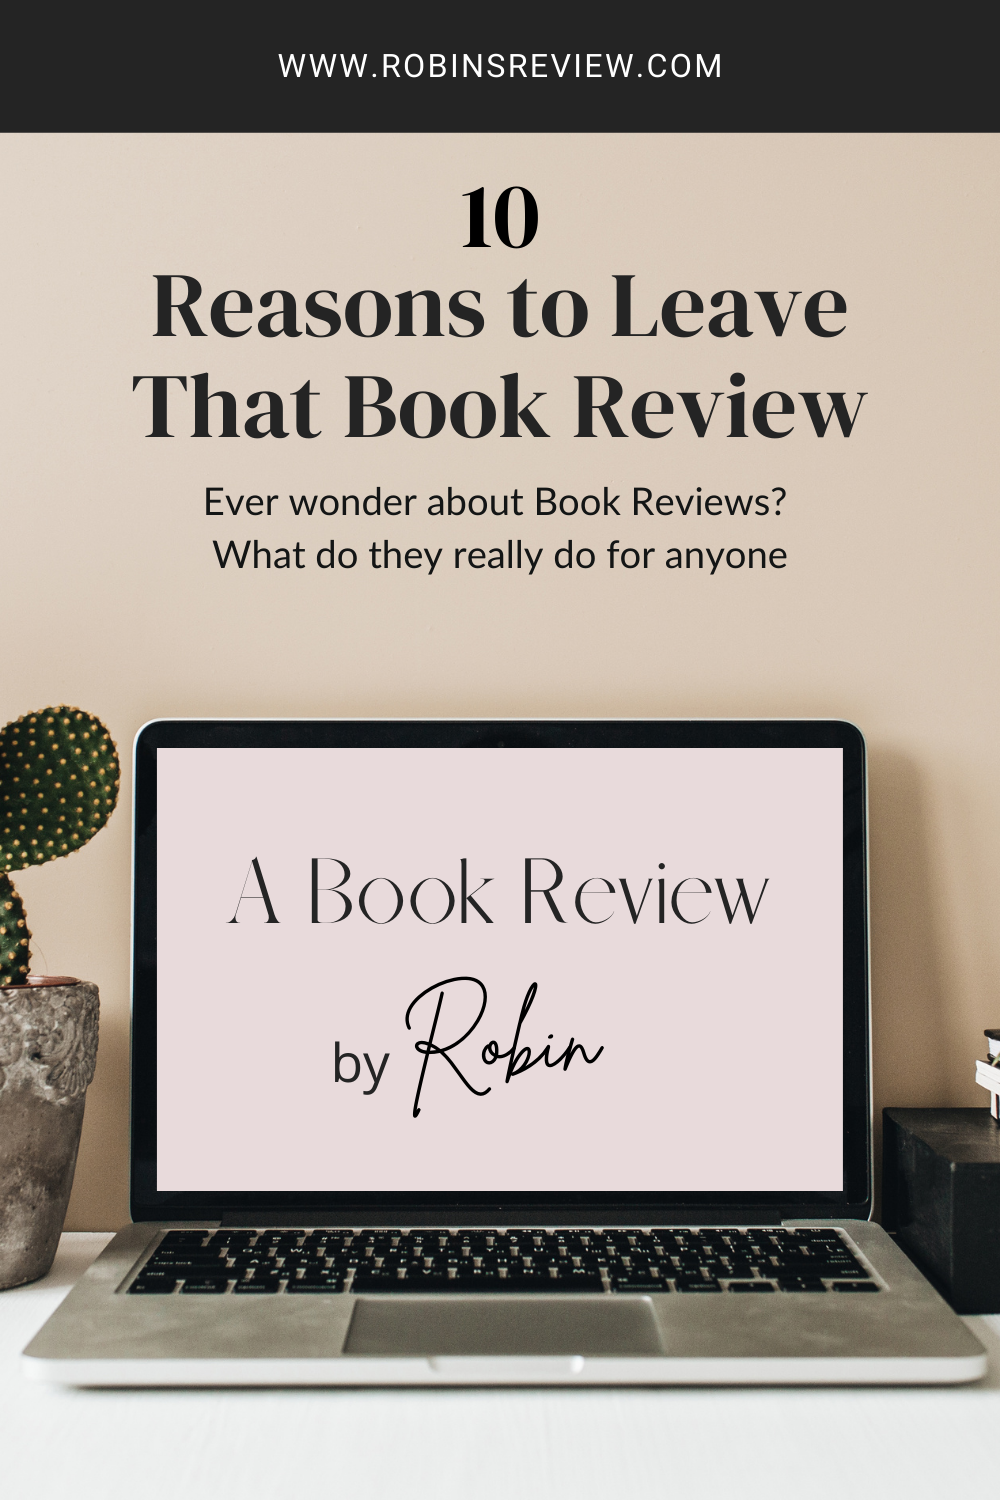 10 Reasons to Leave That Book Review